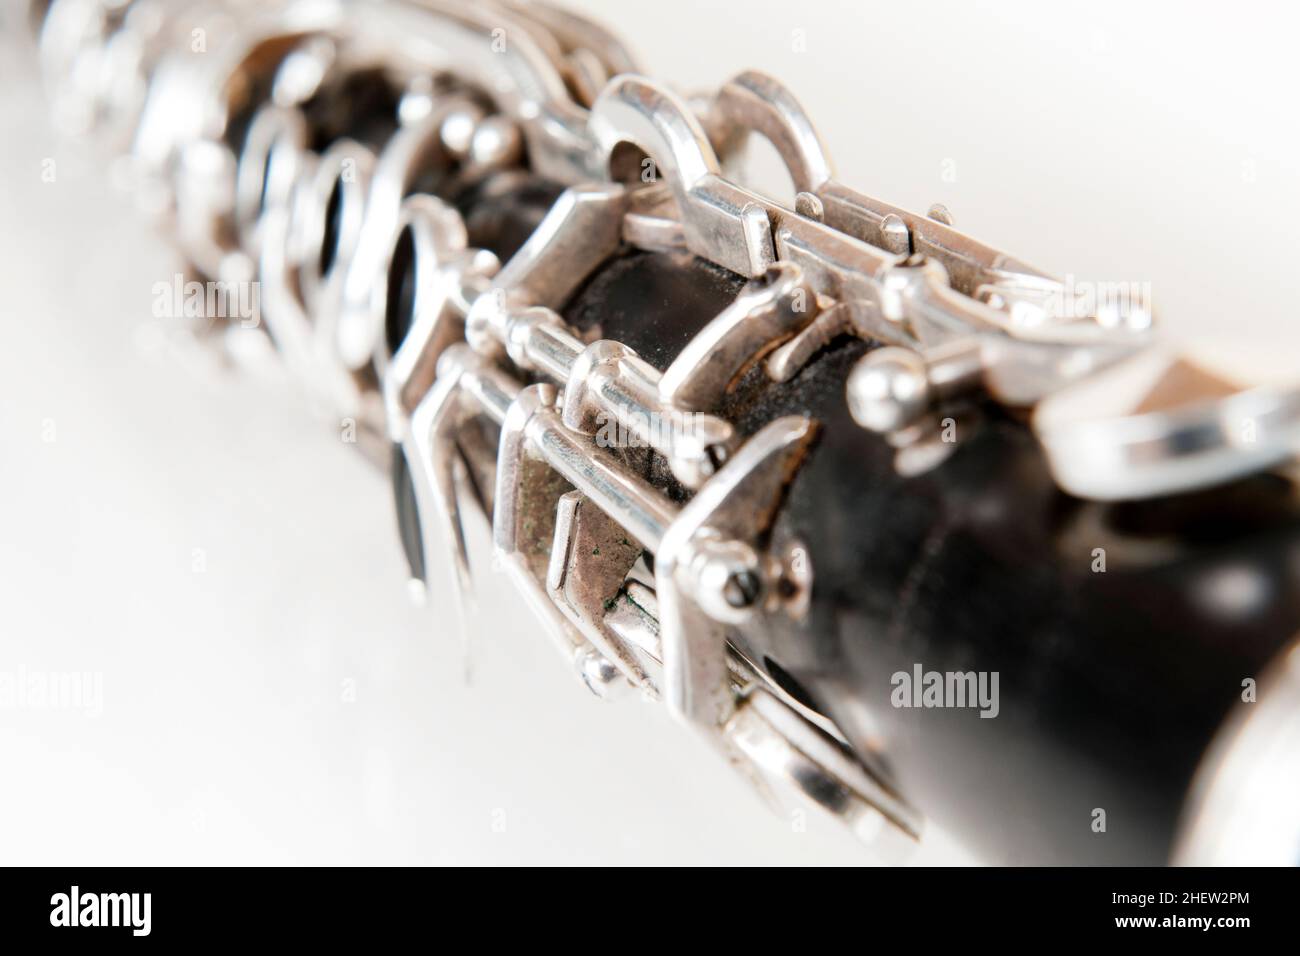 black music clarinet decorated with silver metal on white background Stock Photo